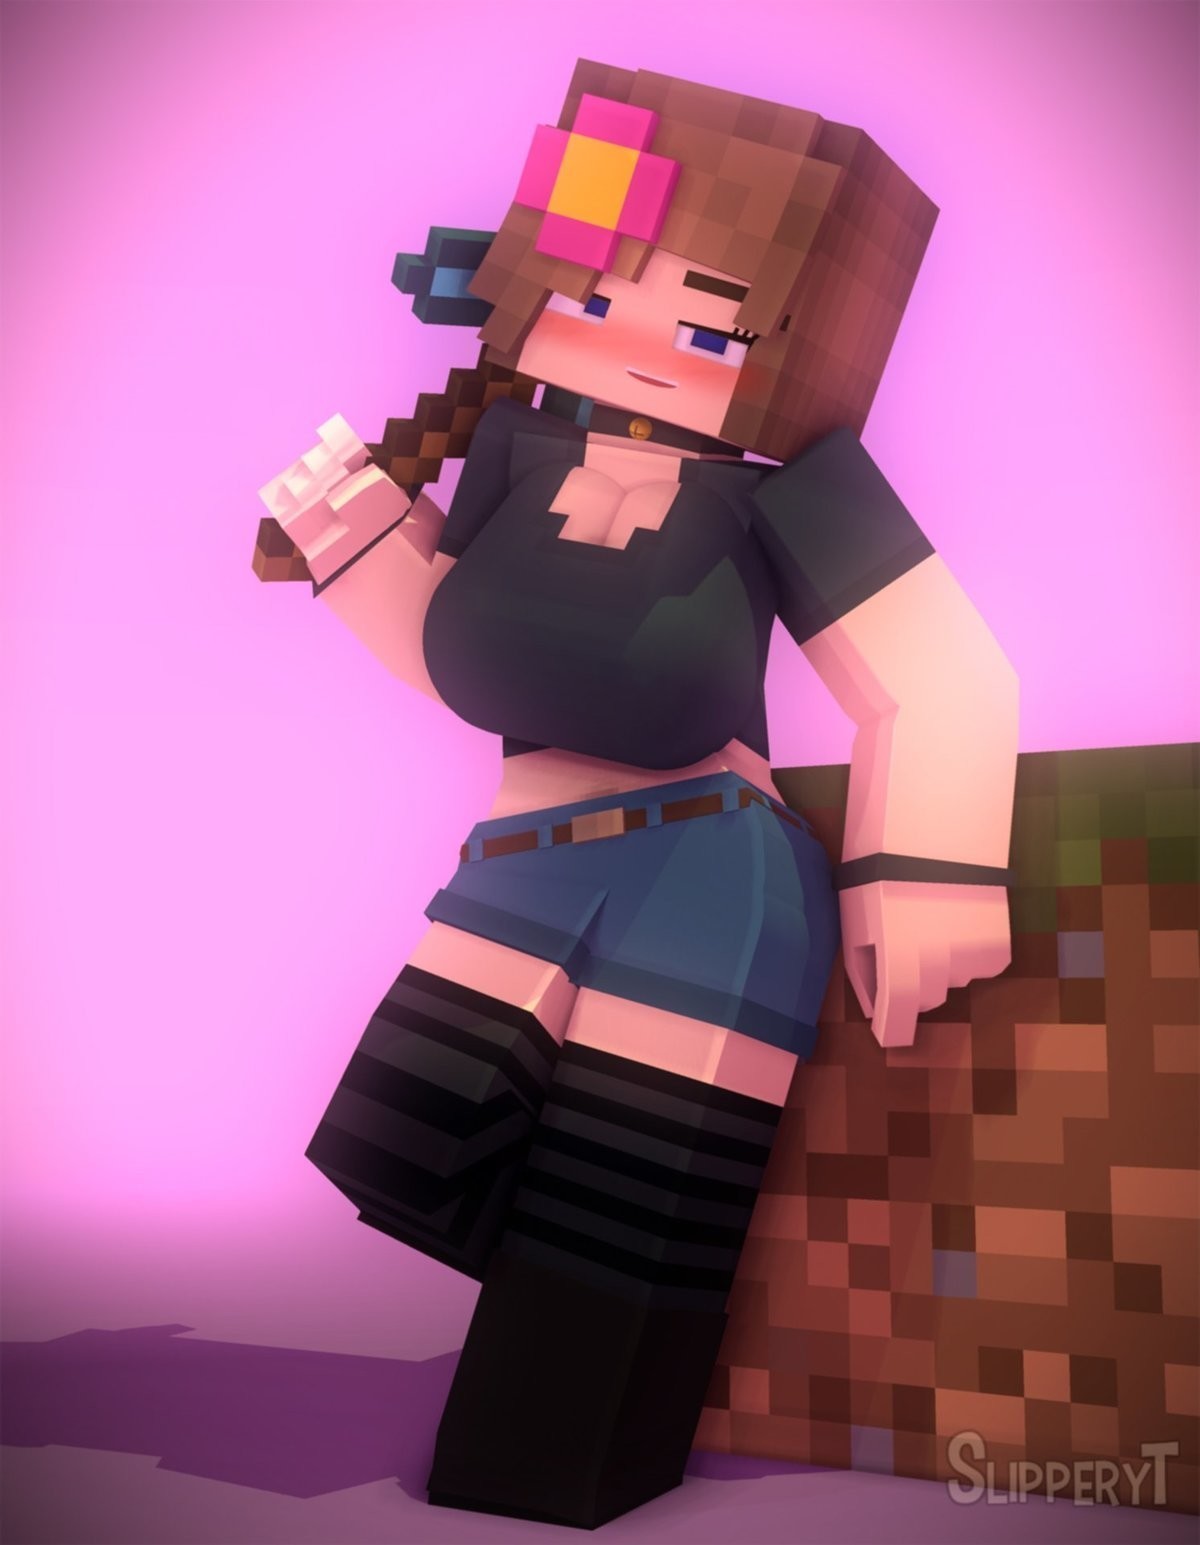 People who use/make the "sexy" minecraft mods are every b...